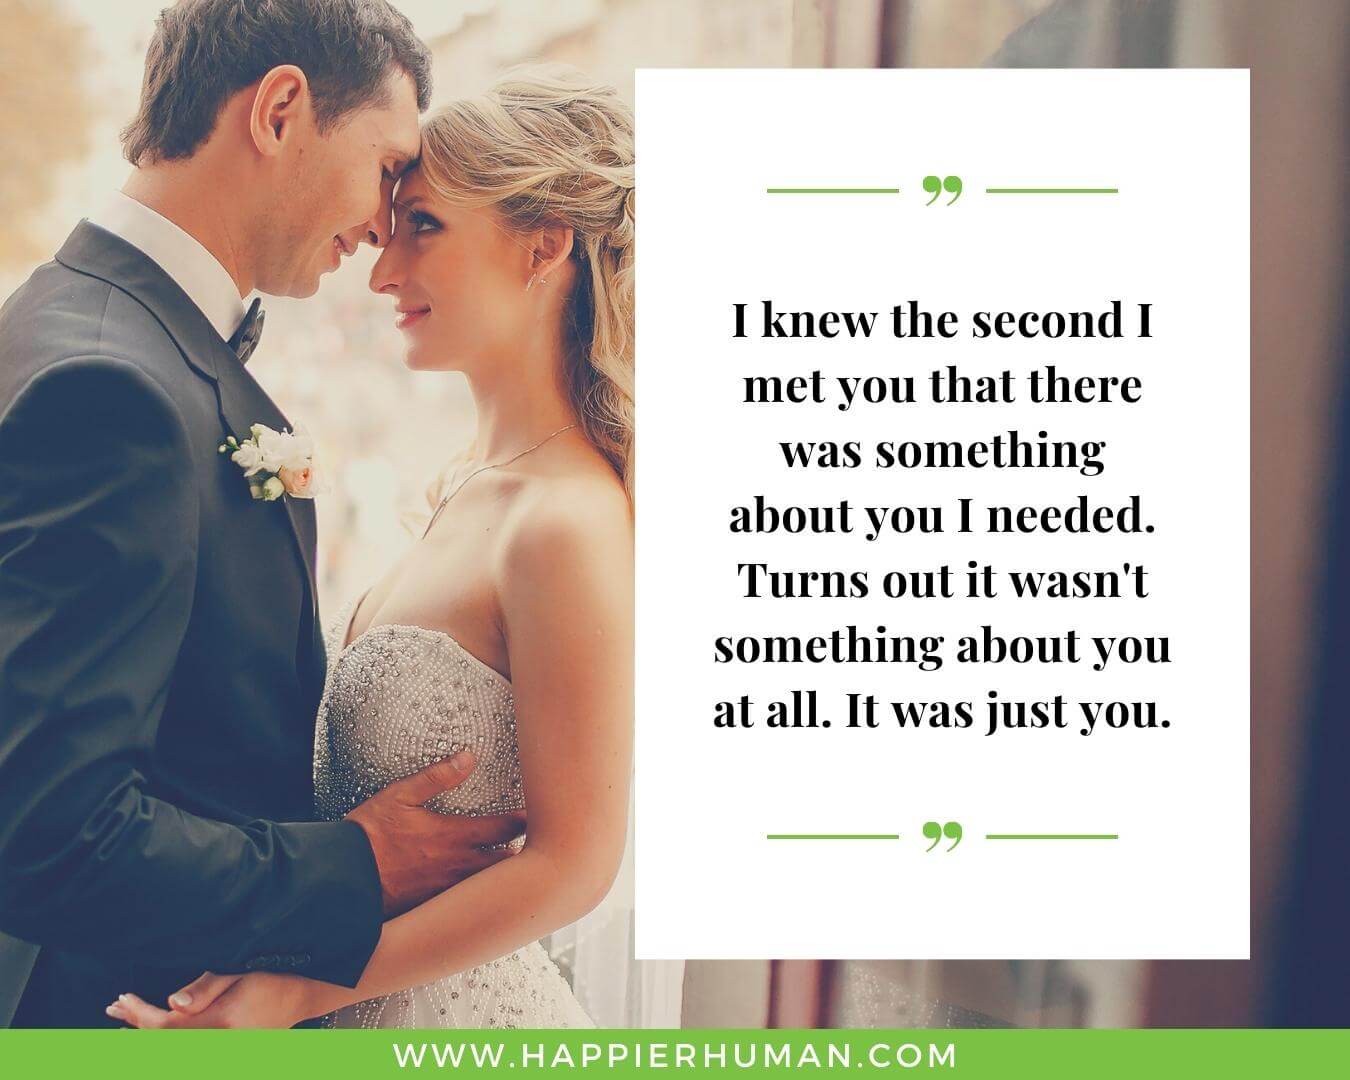 Unconditional Love Quotes for Her - “I knew the second I met you that there was something about you I needed. Turns out it wasn't something about you at all. It was just you.”